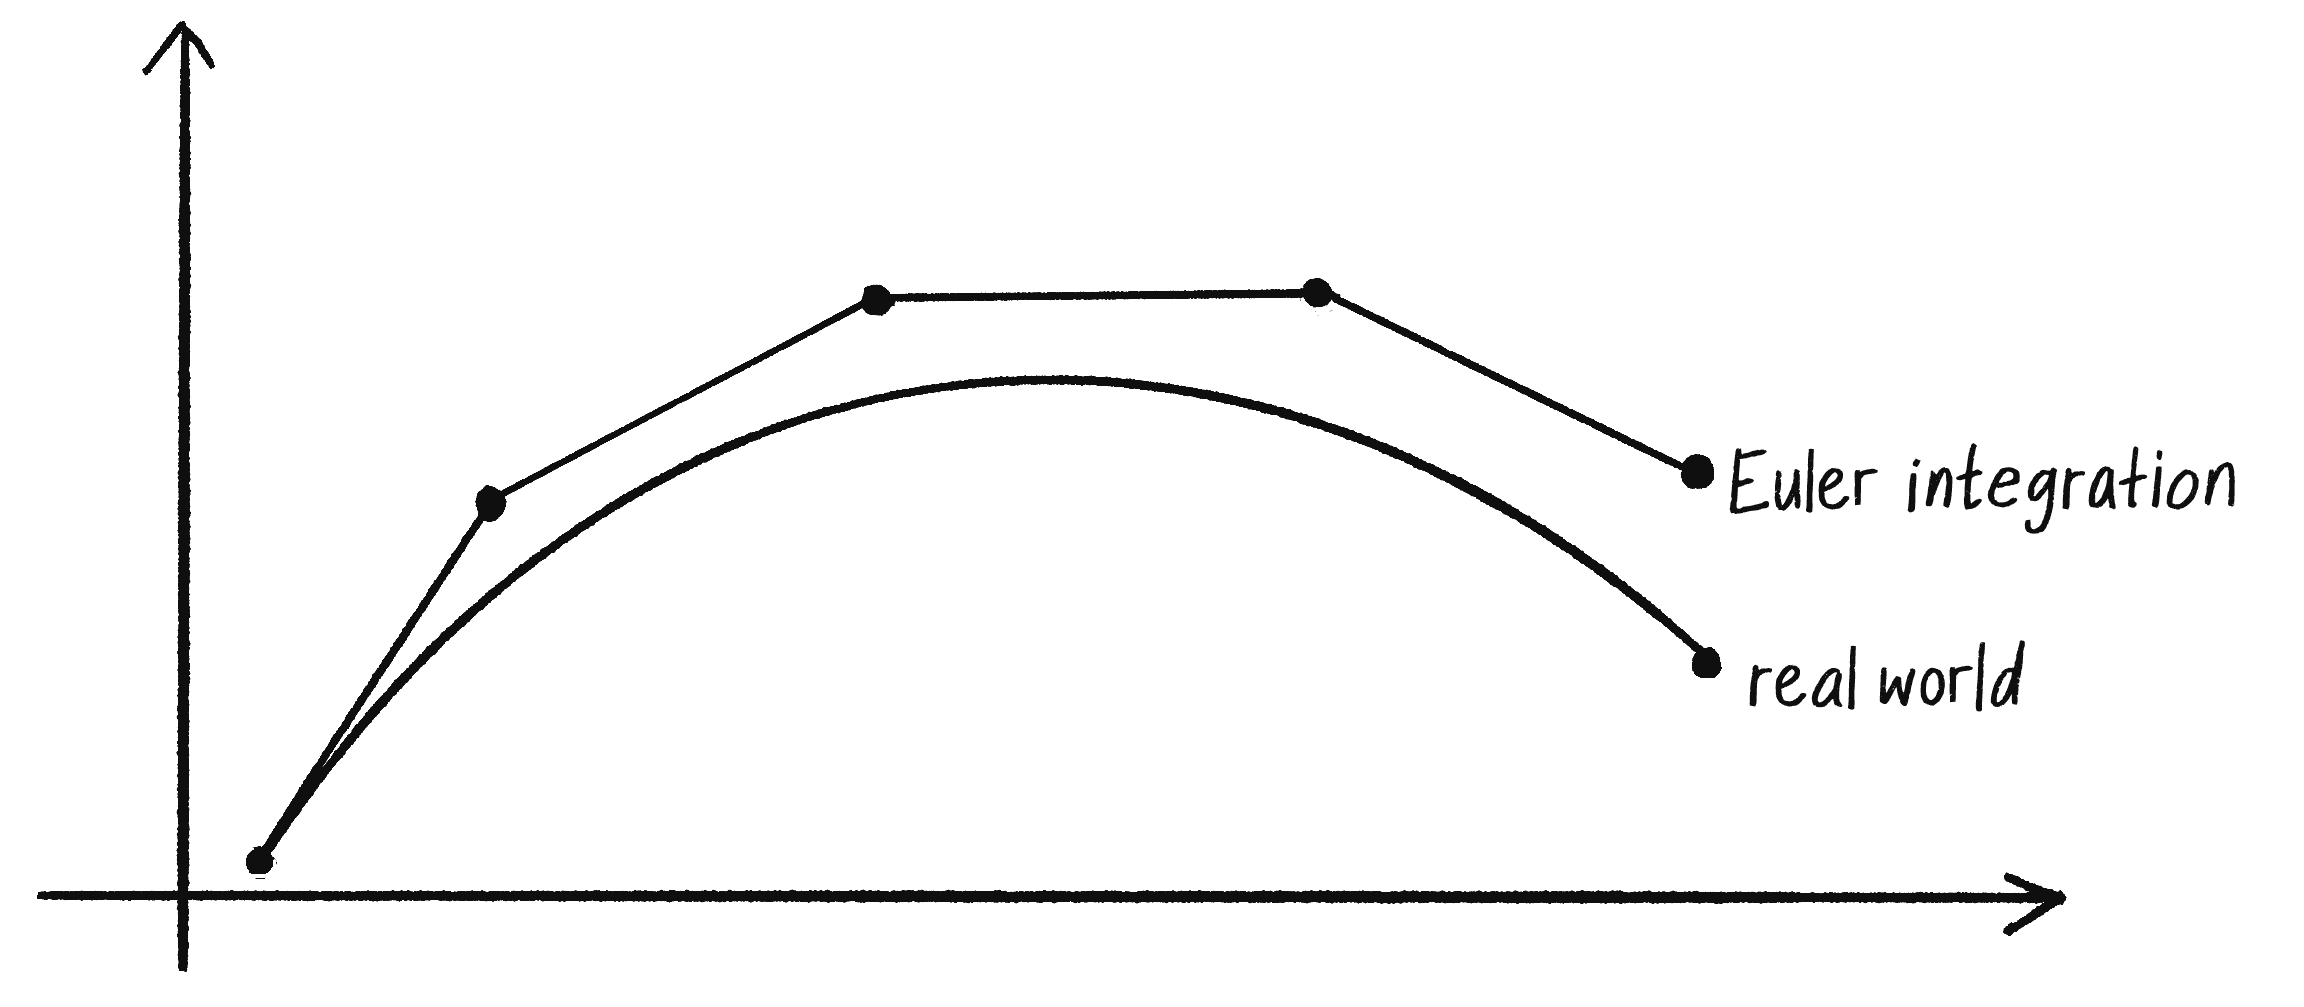 Figure 6.12: The Euler approximation of a curve